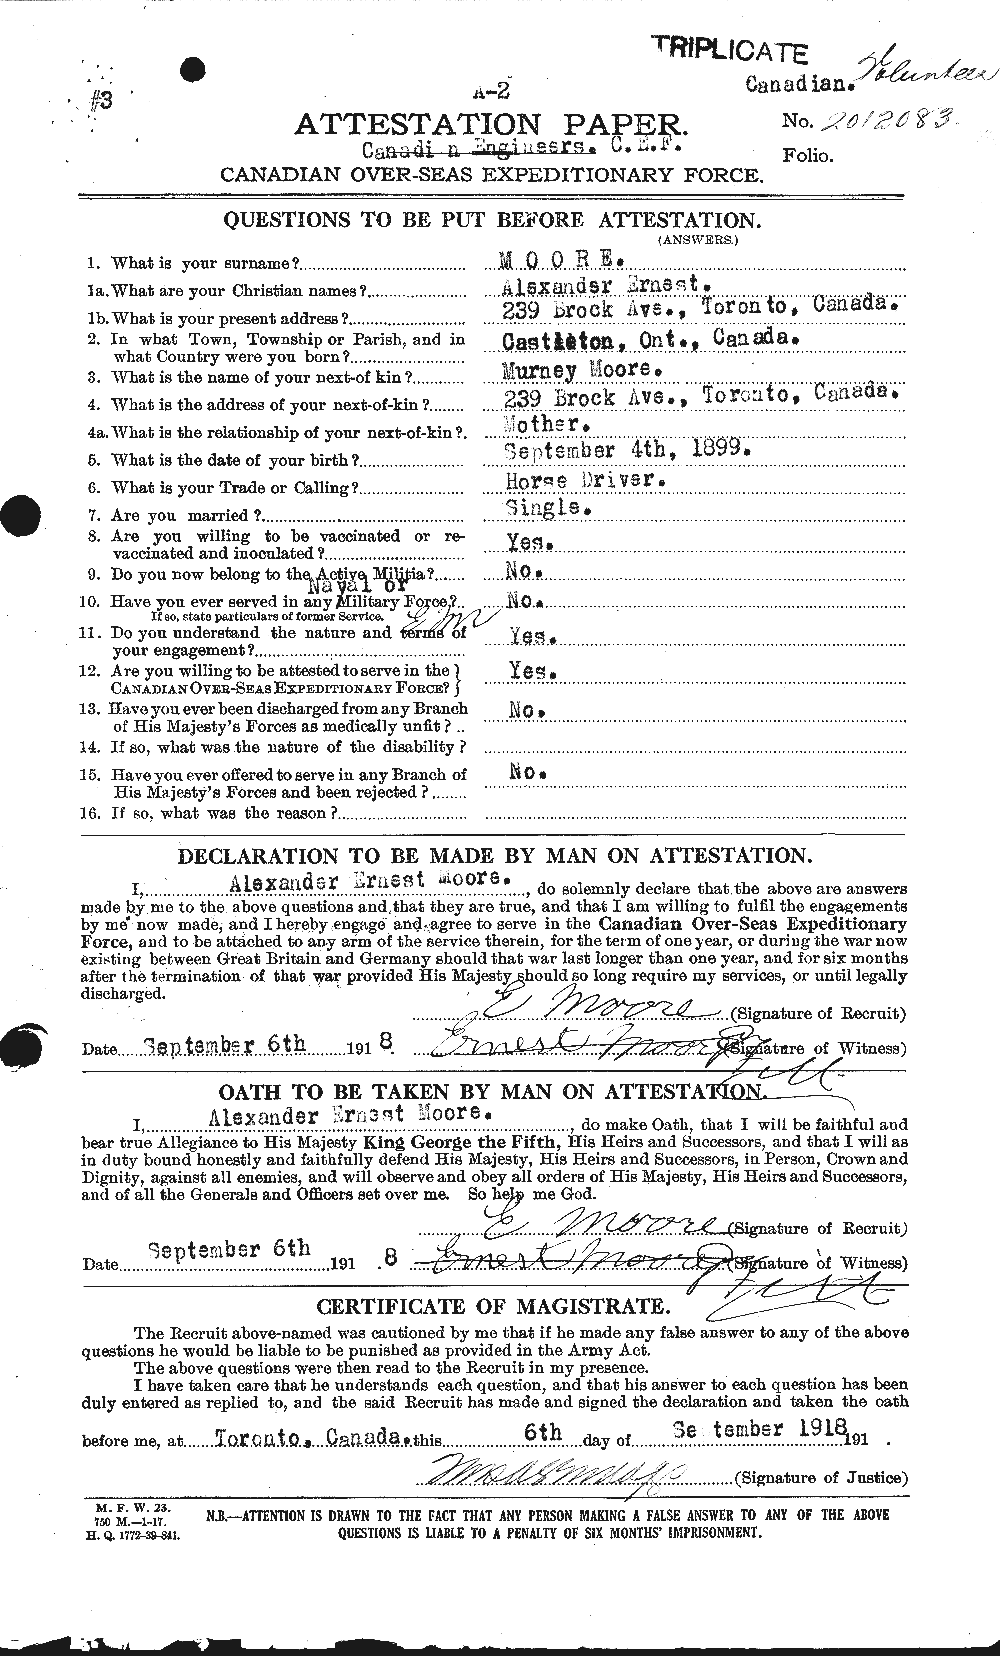 Personnel Records of the First World War - CEF 506366a